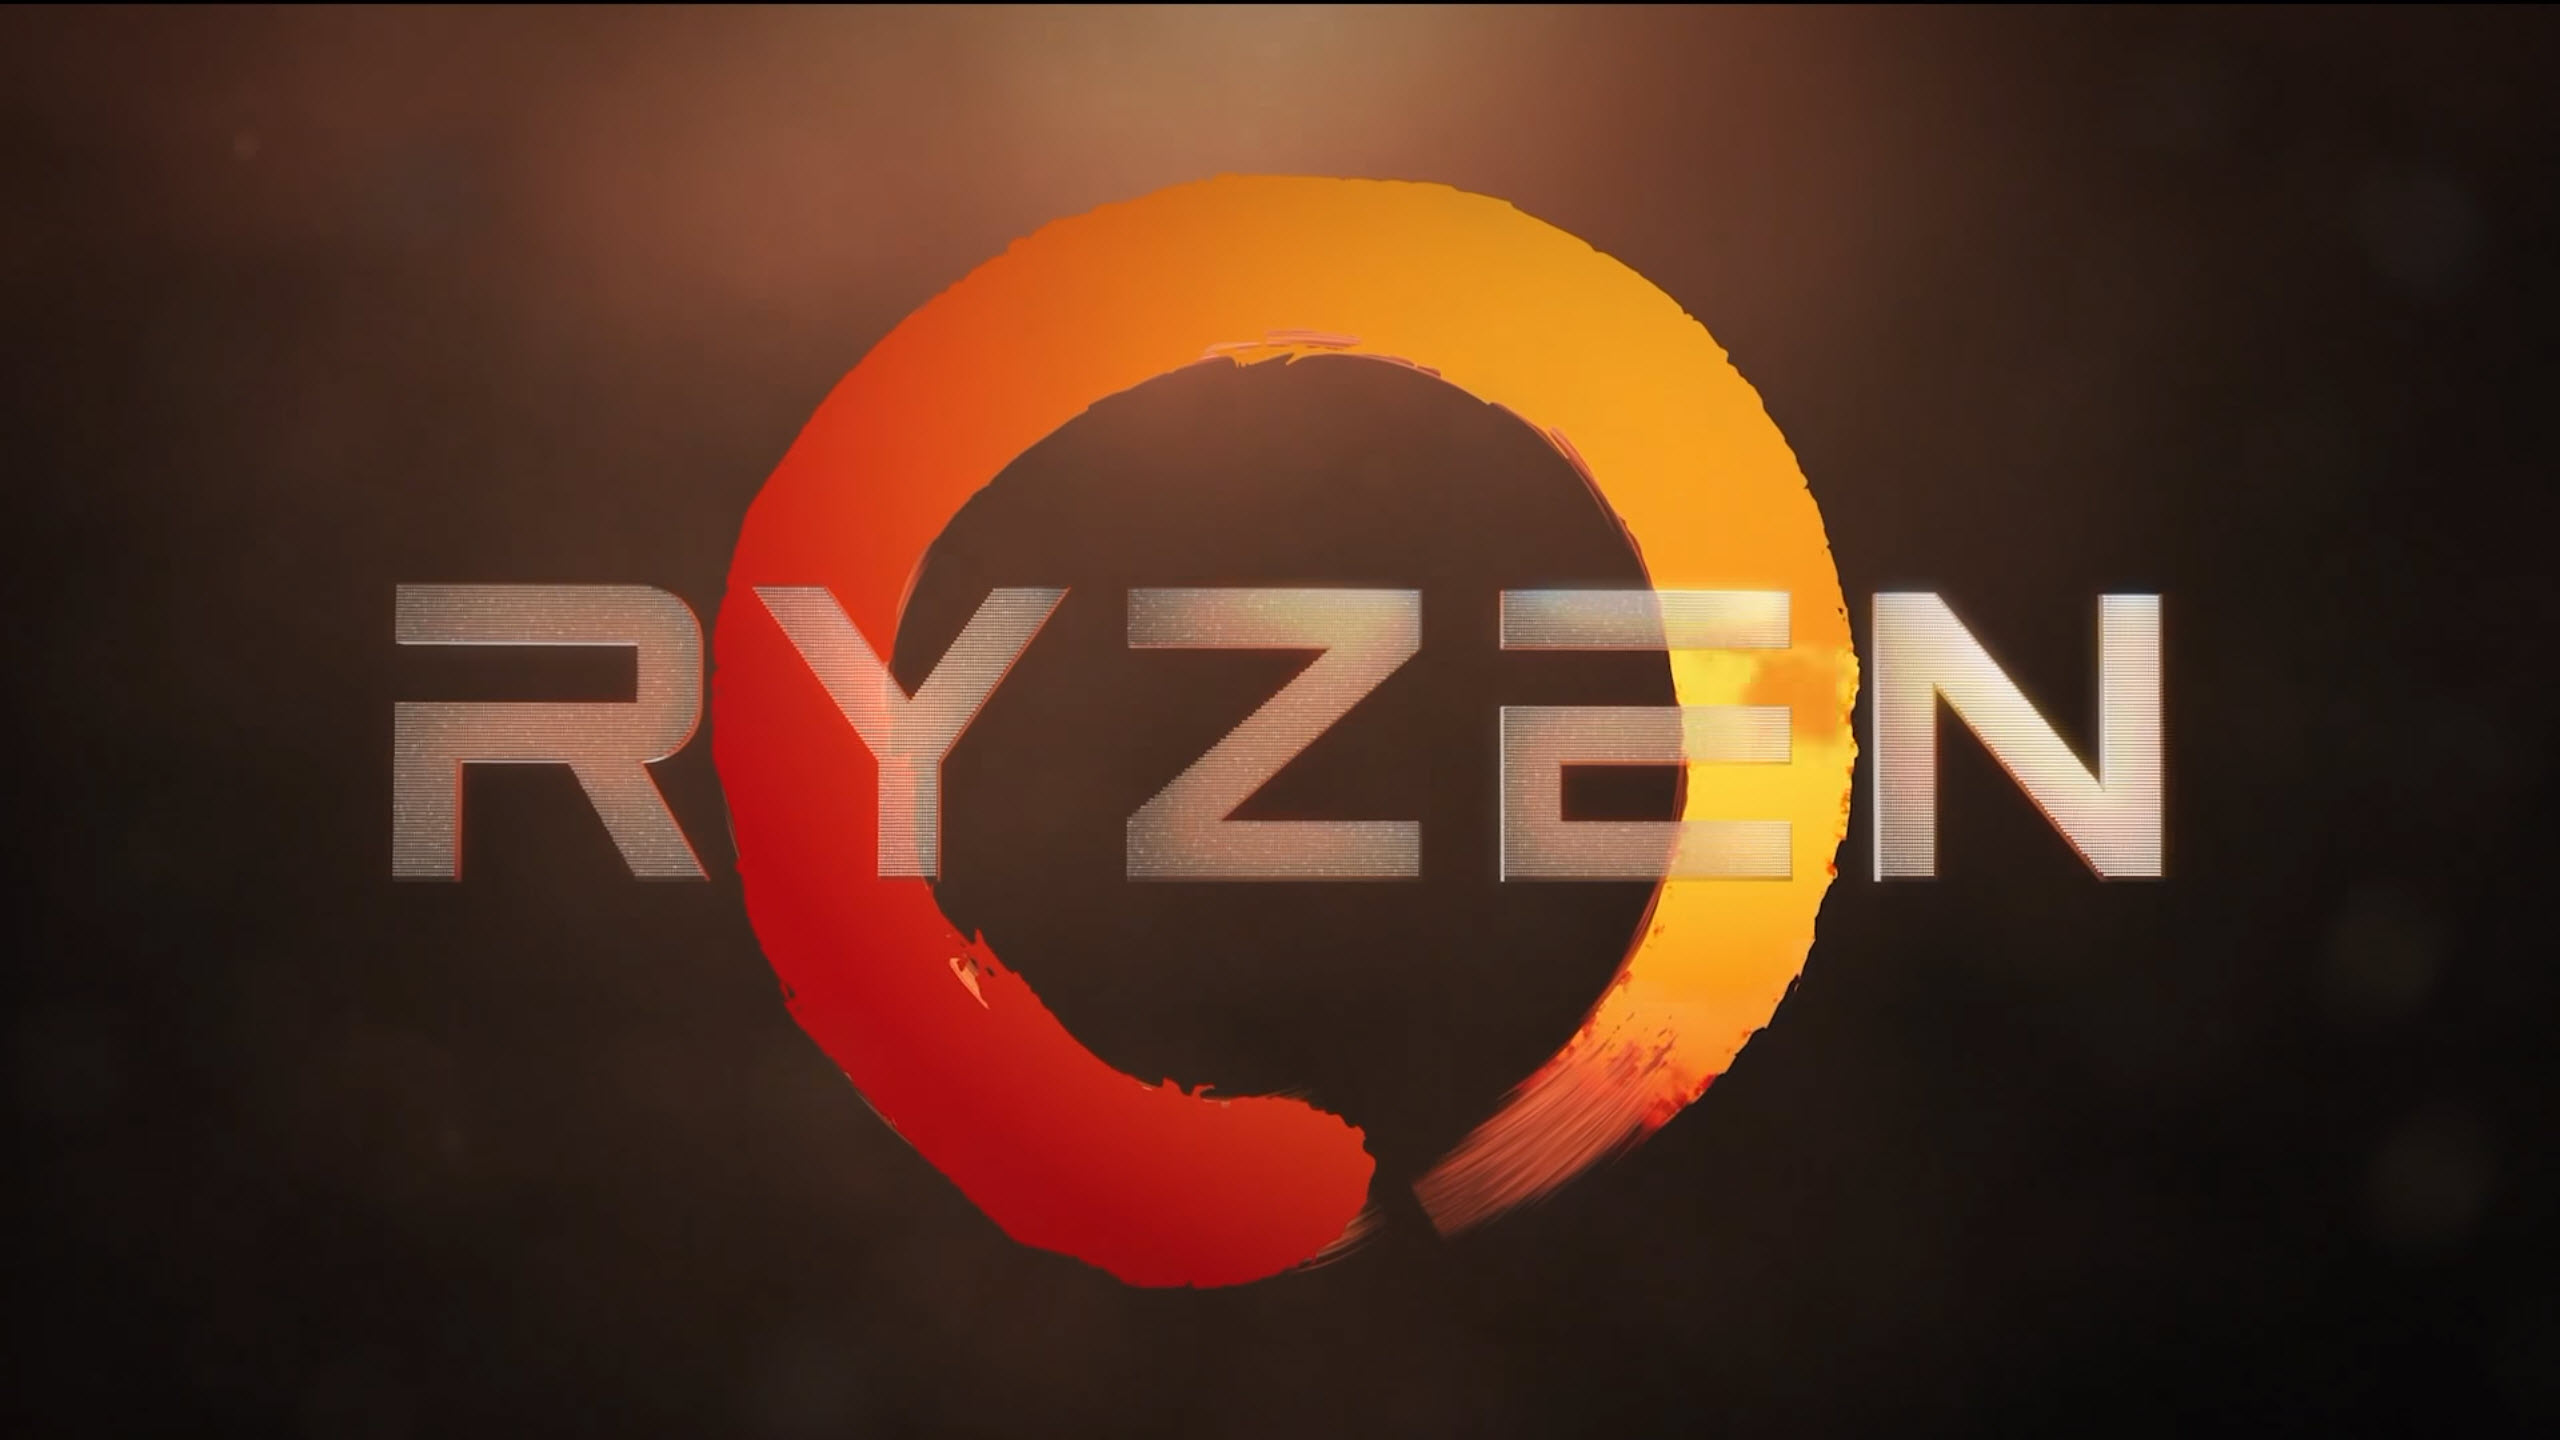 First AMD Ryzen 7 1700X Benchmarks Leaked, Competitive Against Intel Core i7-7700K and i7-6800K